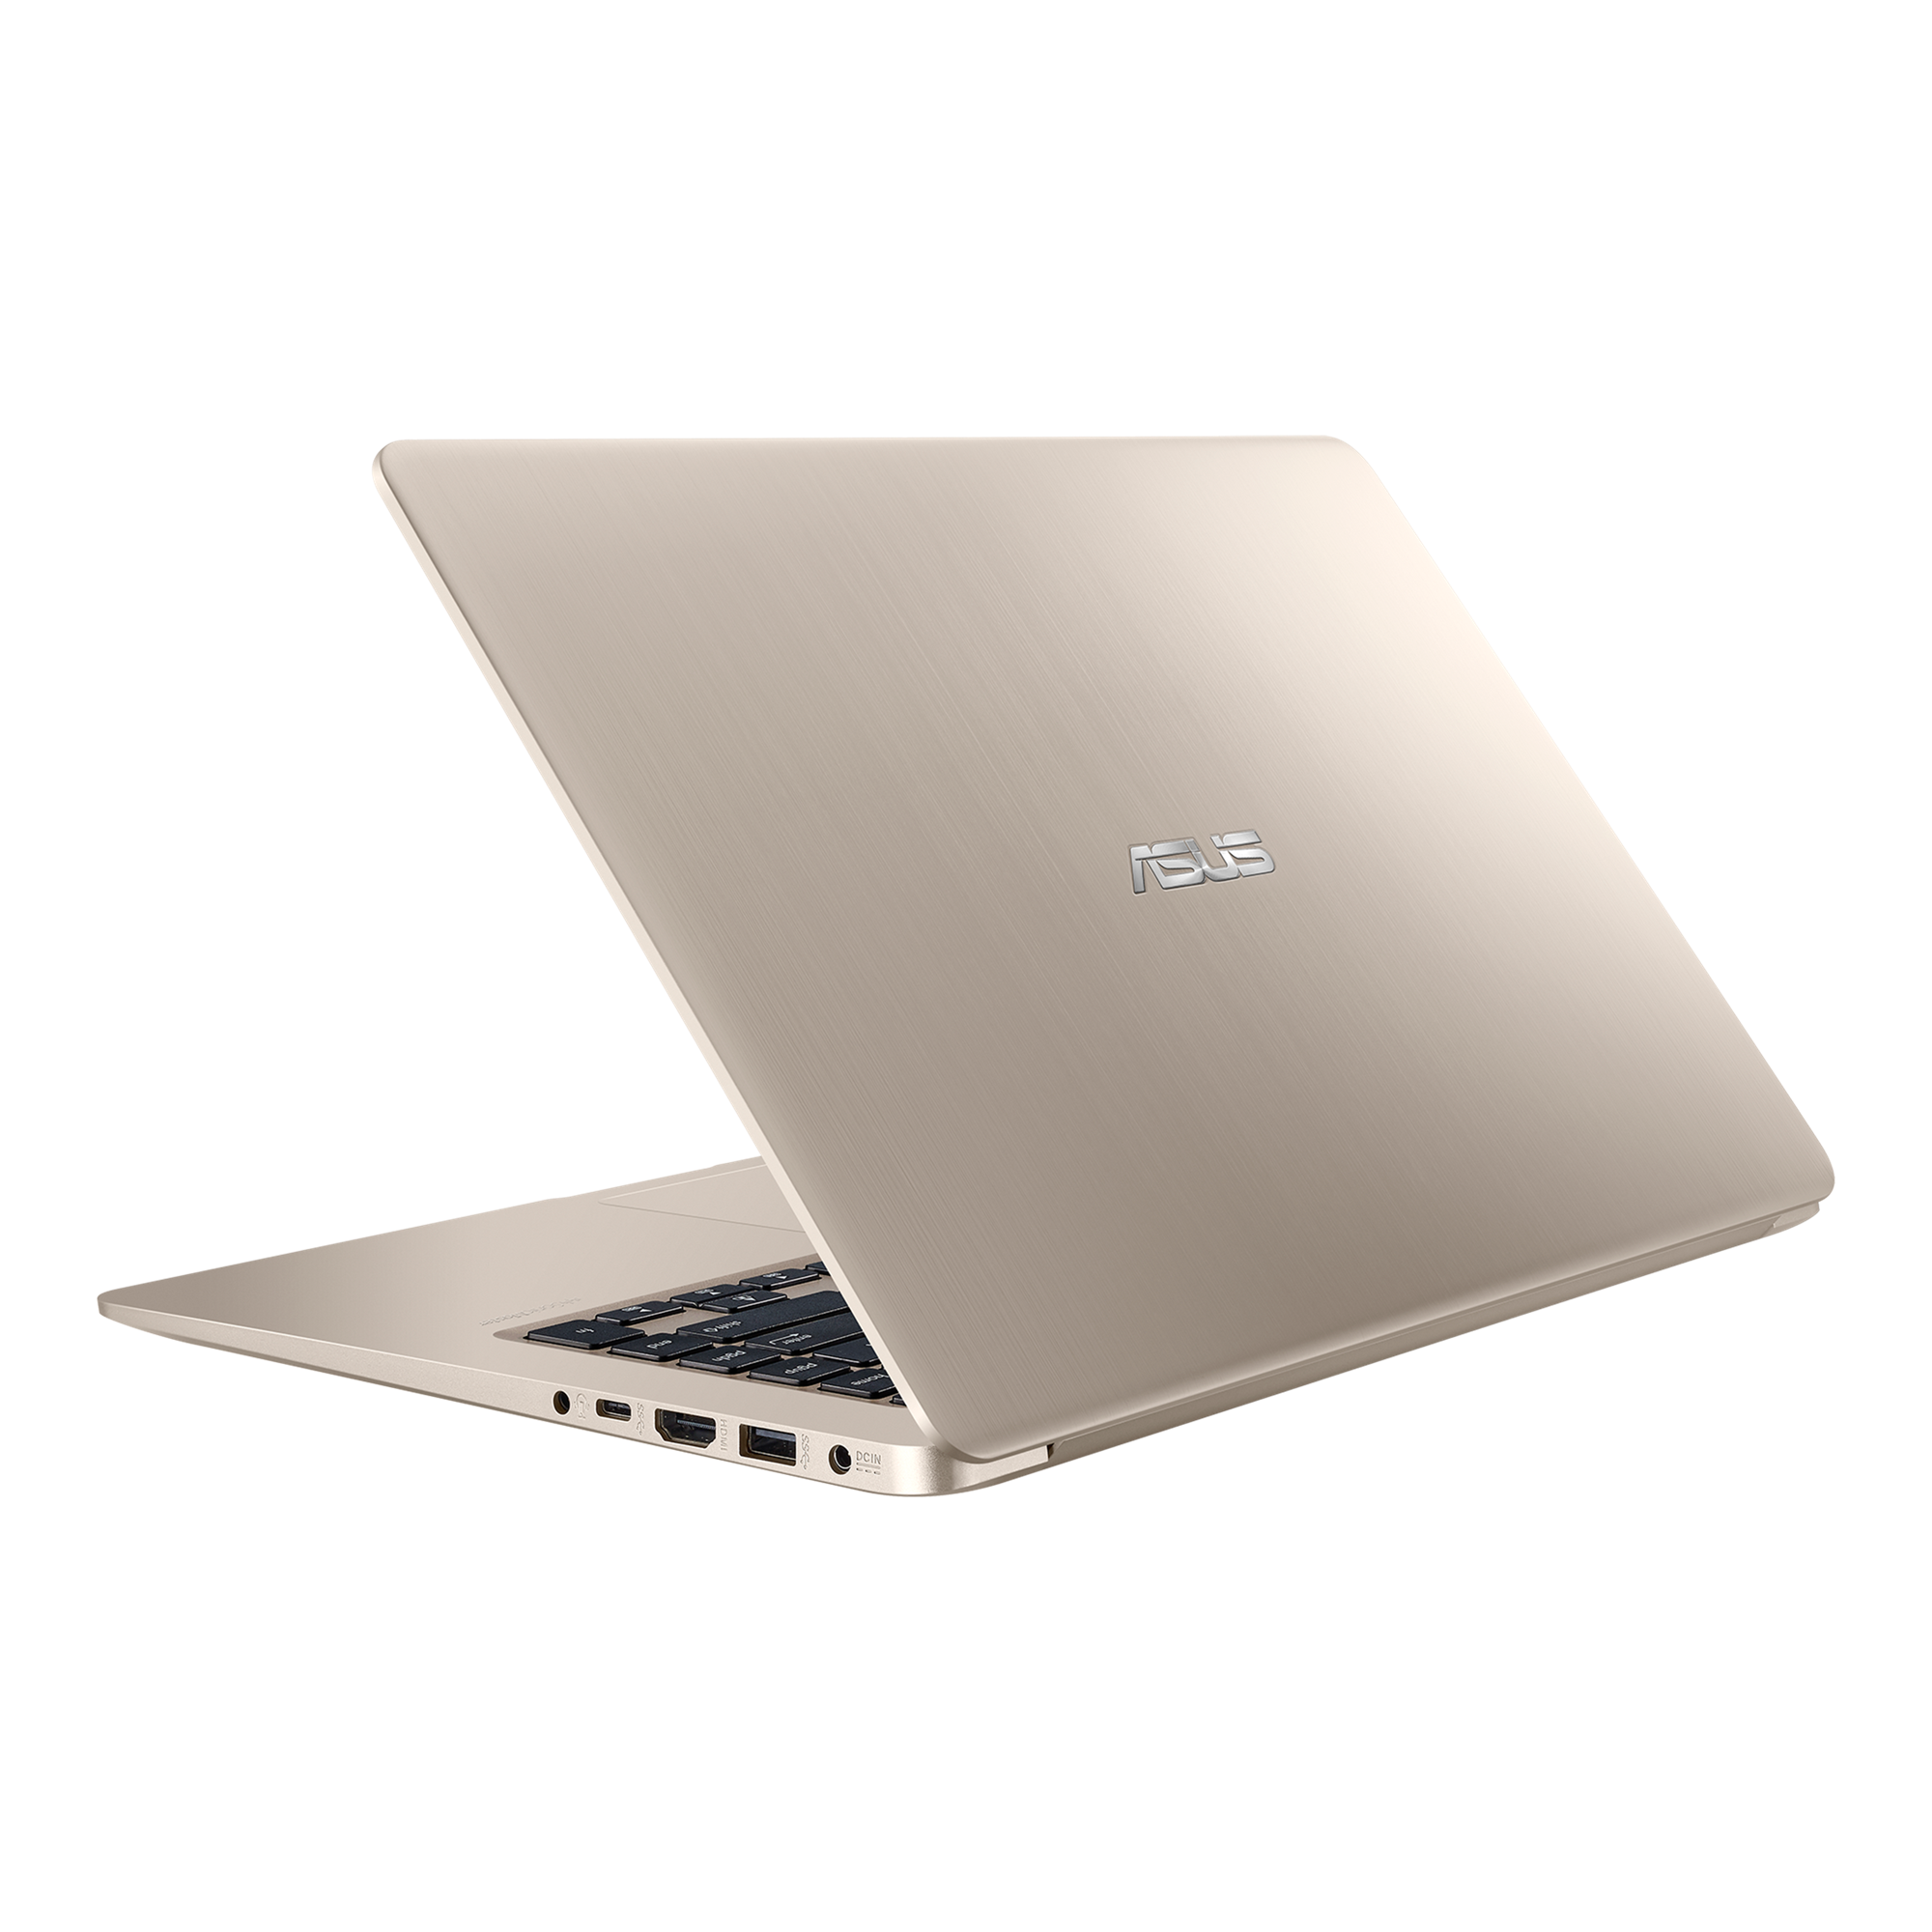 ASUS Vivobook S15 S510｜Laptops For Students｜ASUS USA